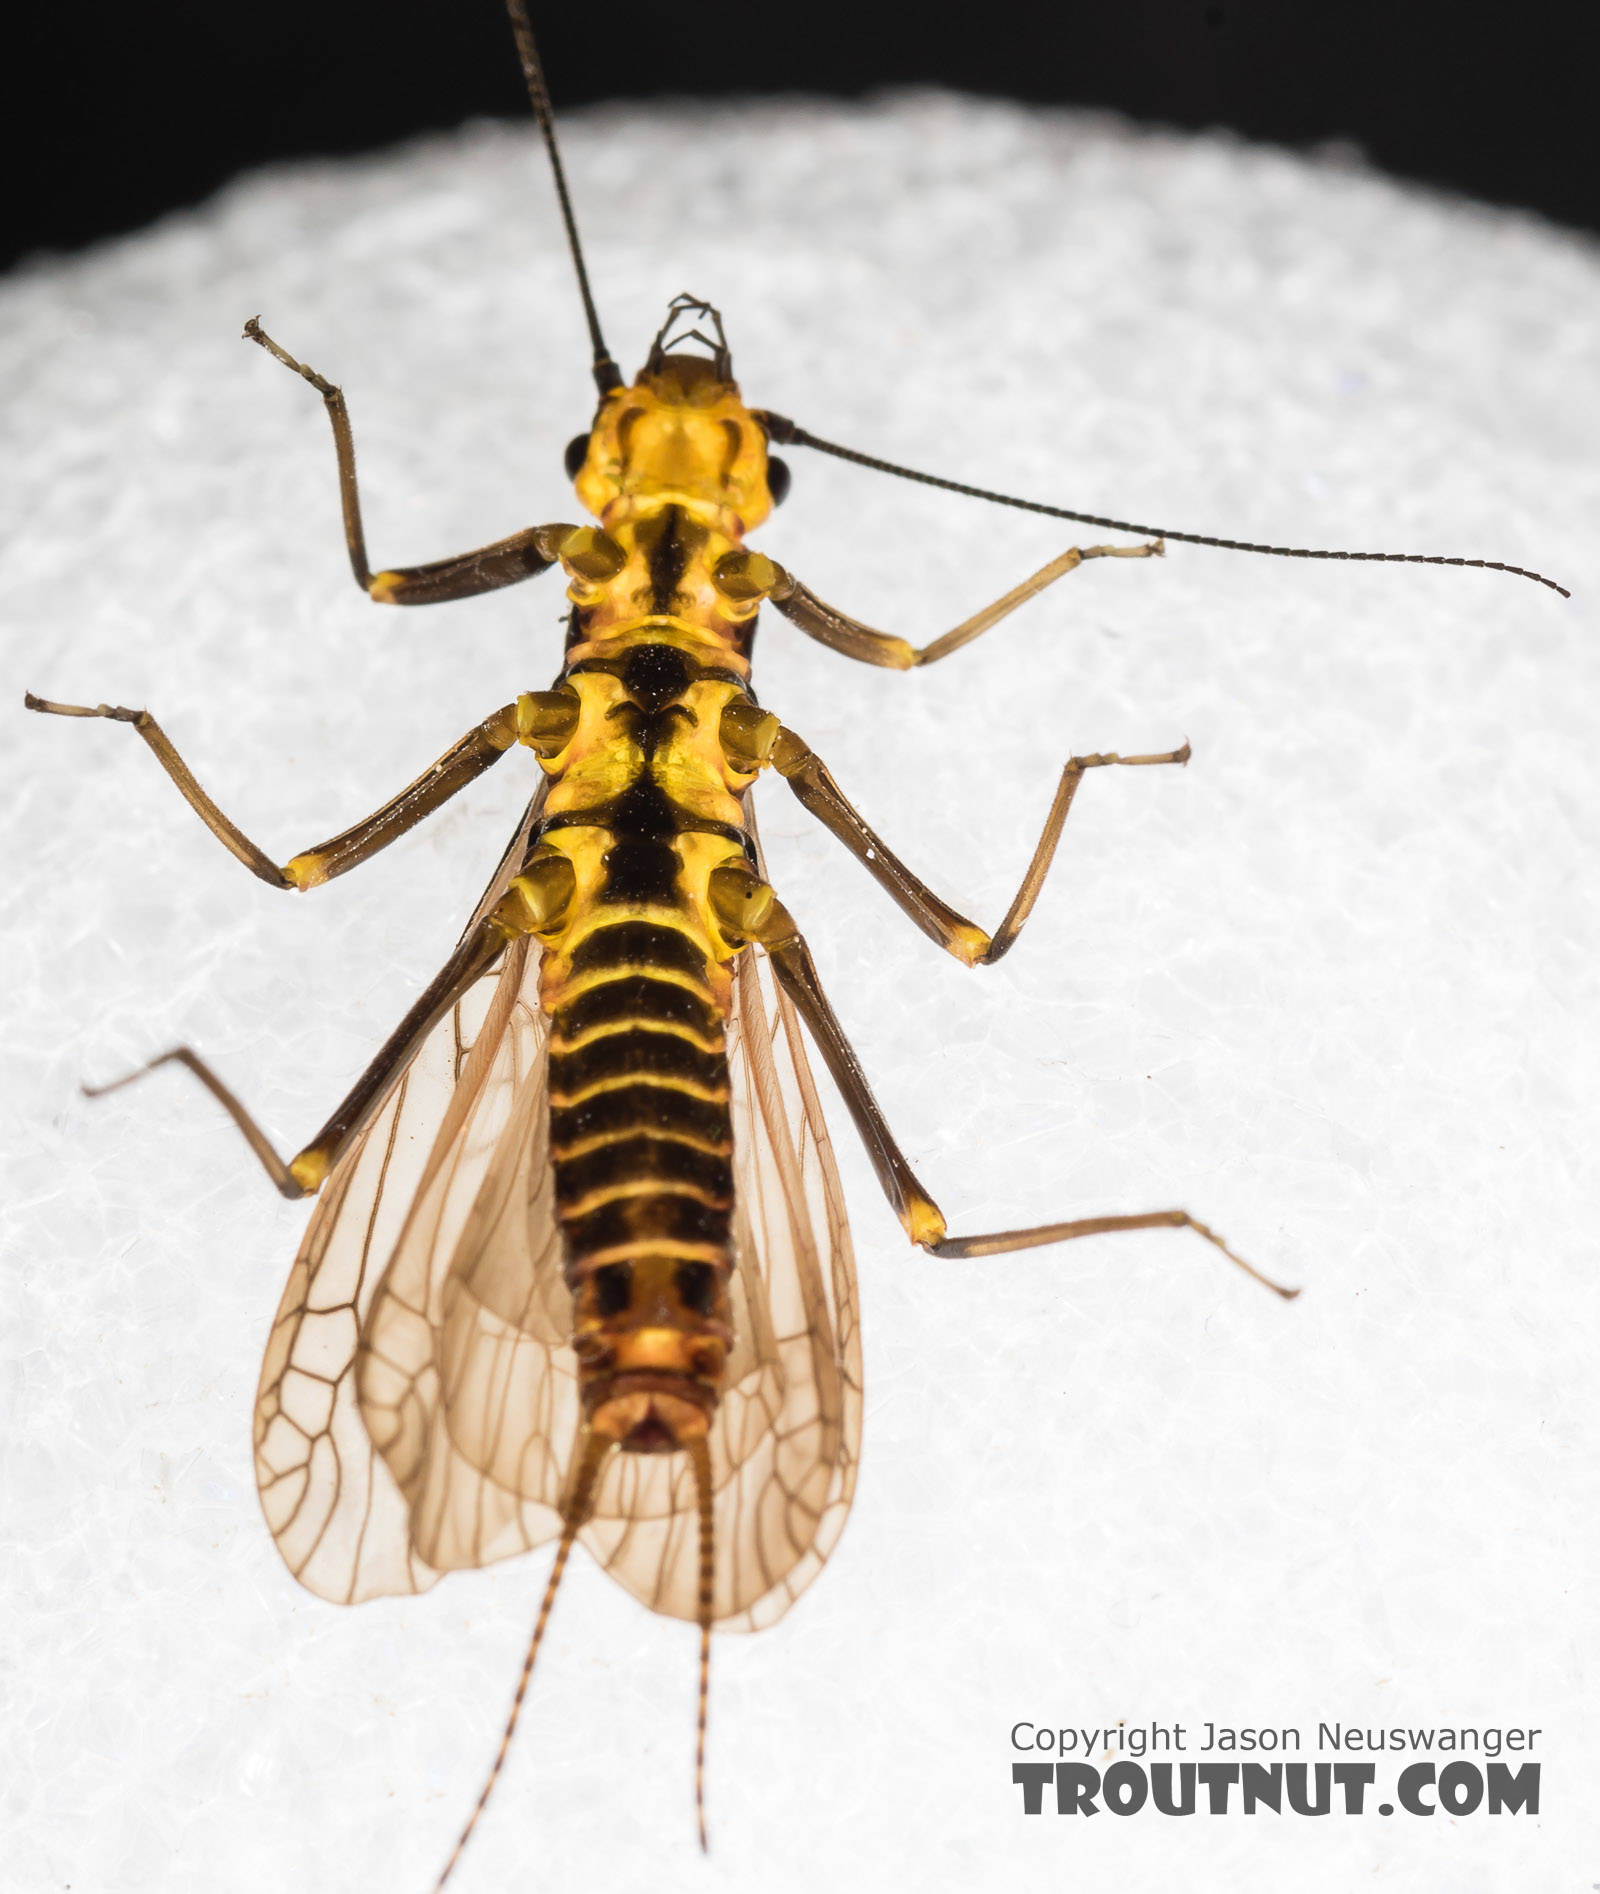 Female Pictetiella expansa Stonefly Adult from the South Fork Snoqualmie River in Washington